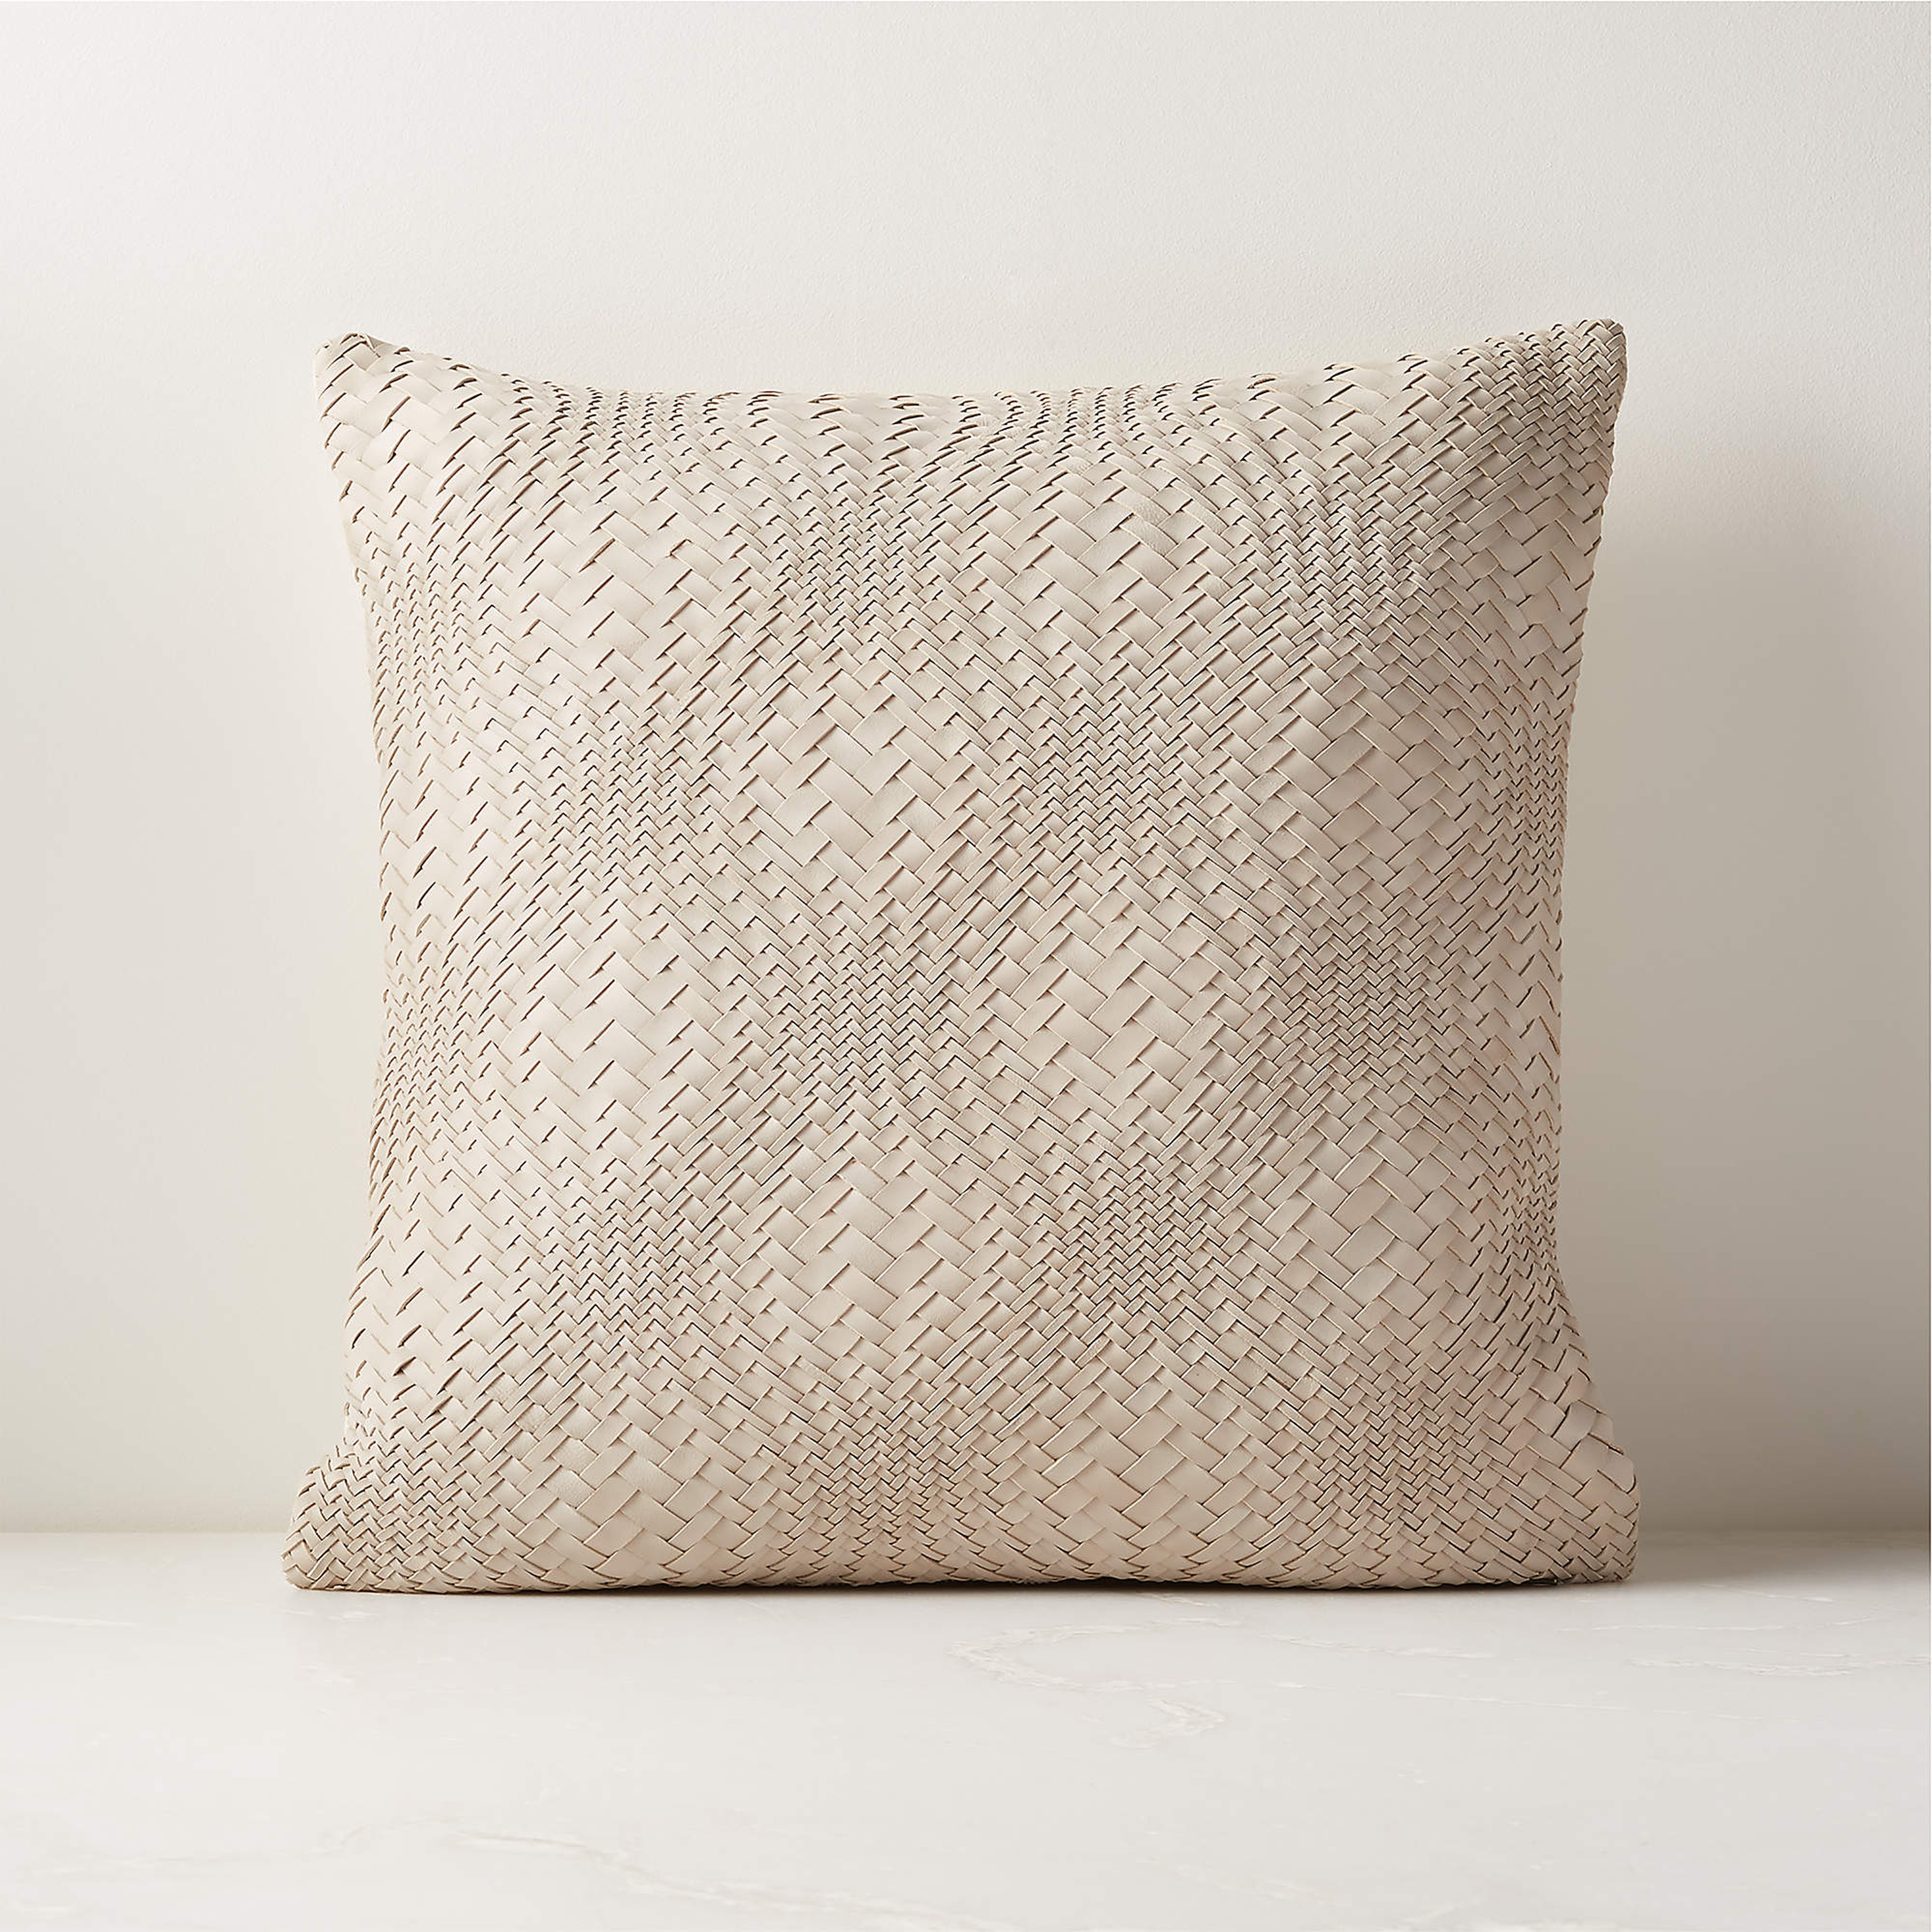 18" FLOW WHITE LEATHER THROW PILLOW WITH DOWN-ALTERNATIVE INSERT - CB2